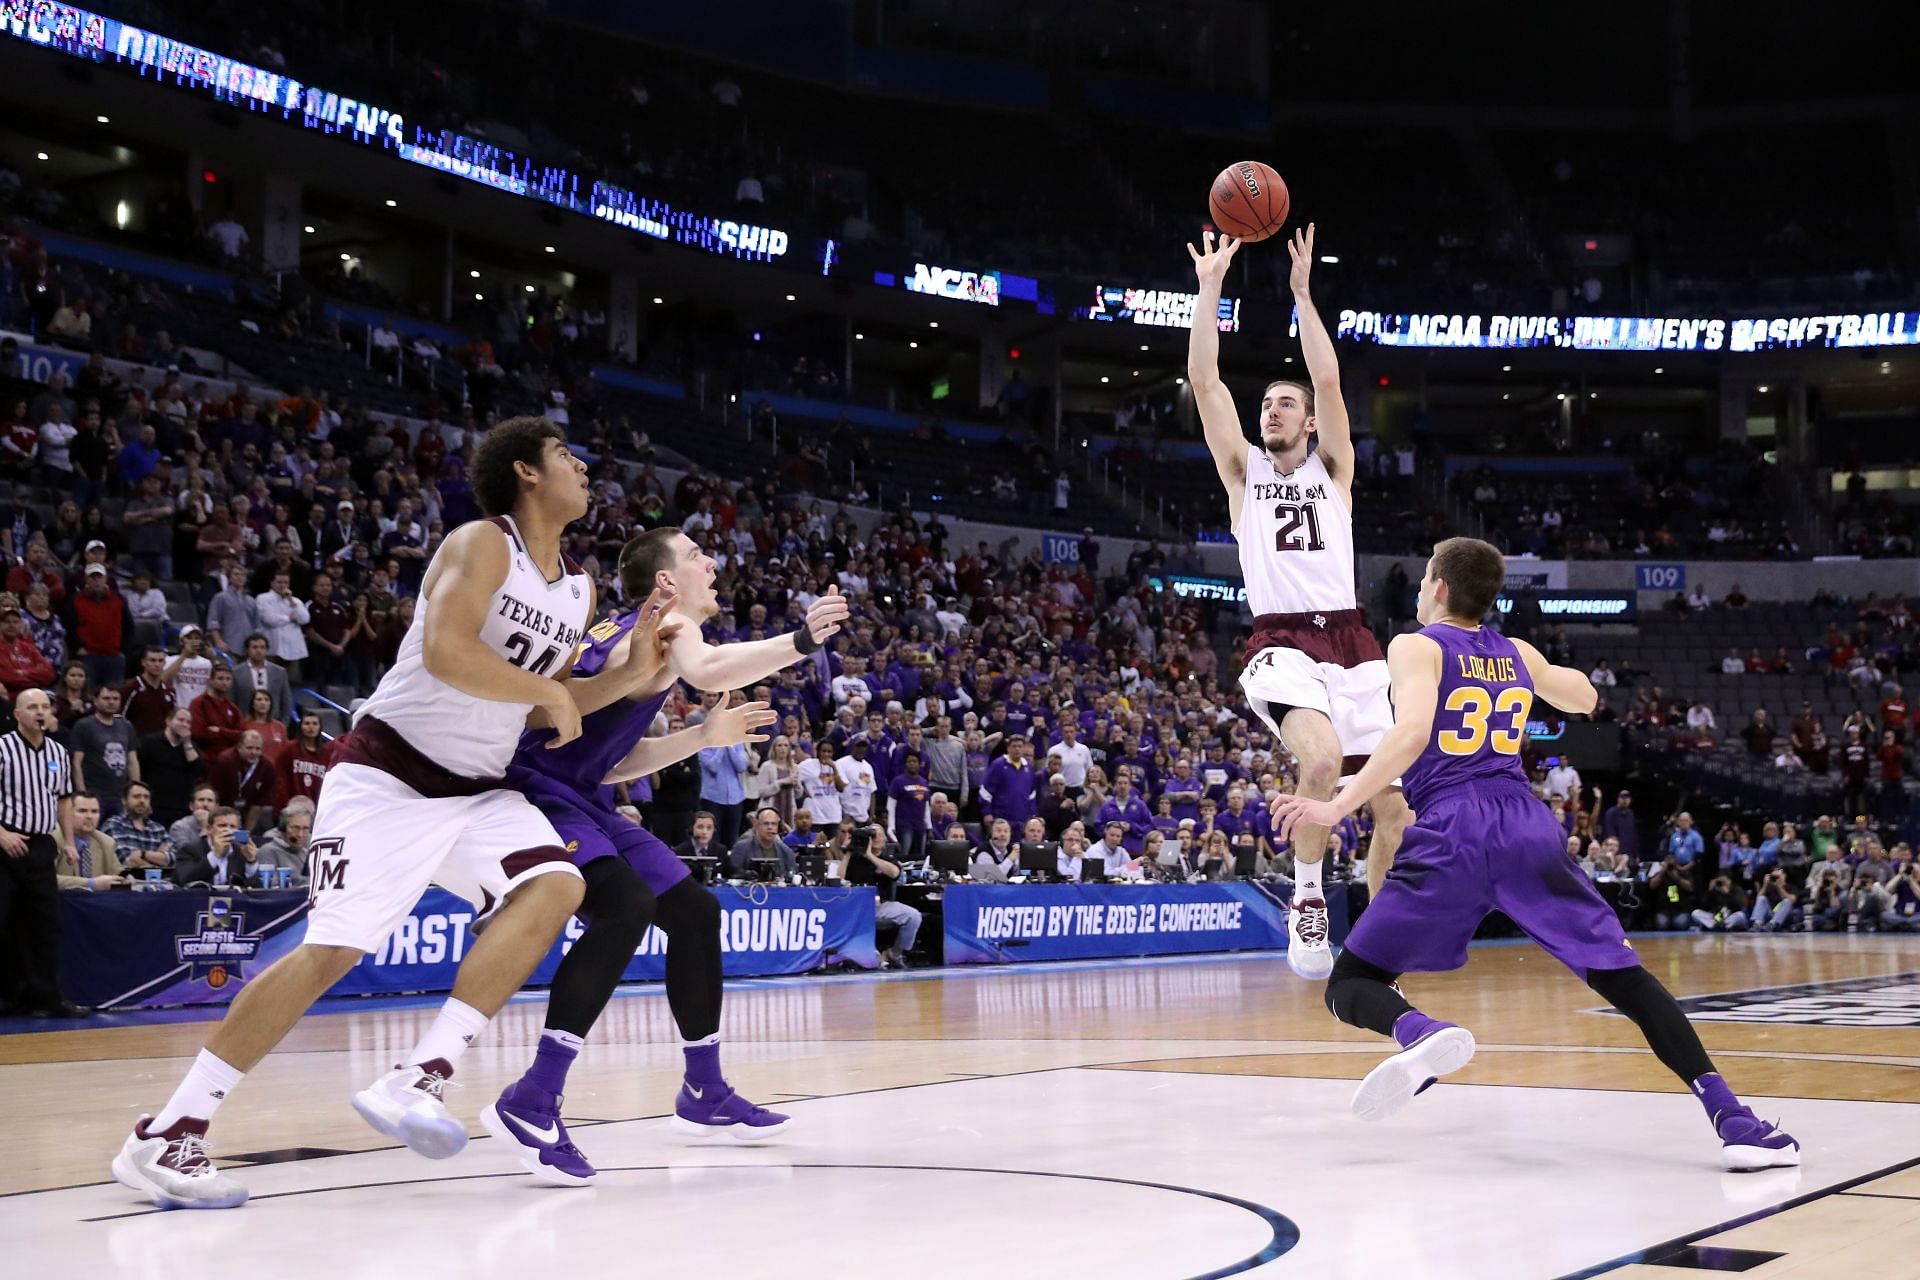 Texas A&amp;M guard &lt;a href=&#039;https://www.sportskeeda.com/basketball/alex-caruso&#039; target=&#039;_blank&#039; rel=&#039;noopener noreferrer&#039;&gt;Alex Caruso&lt;/a&gt; in one of the wildest comeback wins in college basketball history.